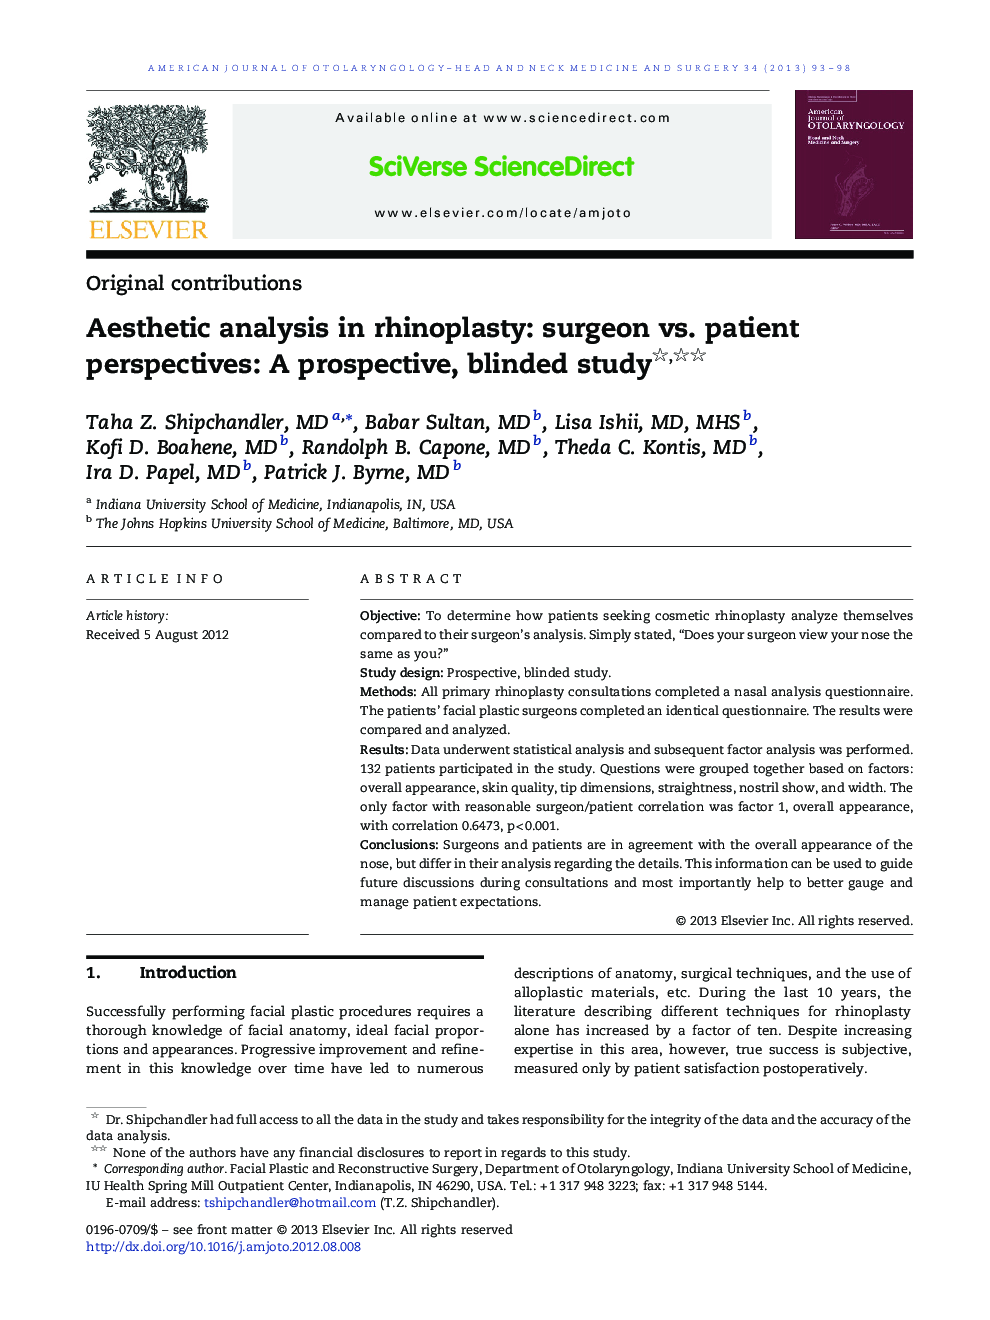 Aesthetic analysis in rhinoplasty: surgeon vs. patient perspectives: A prospective, blinded study